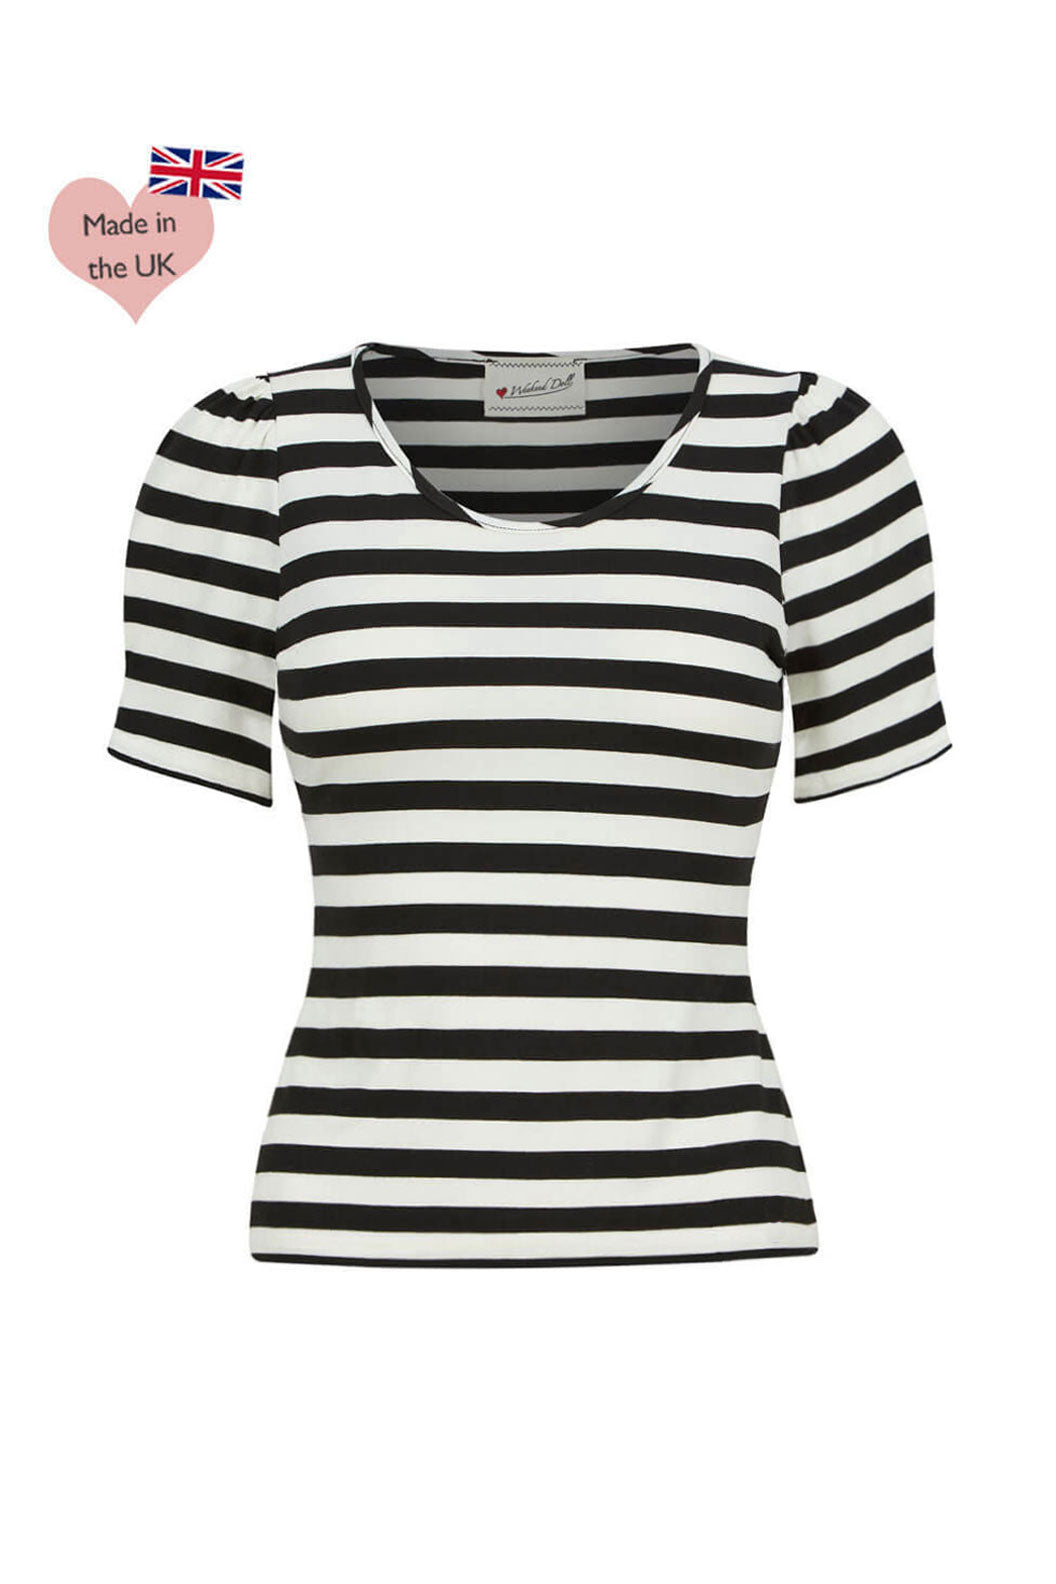 Retro Scoop Neck Black and Ivory Striped Jersey Top  | Retro Pin Up Style | Weekend Doll 